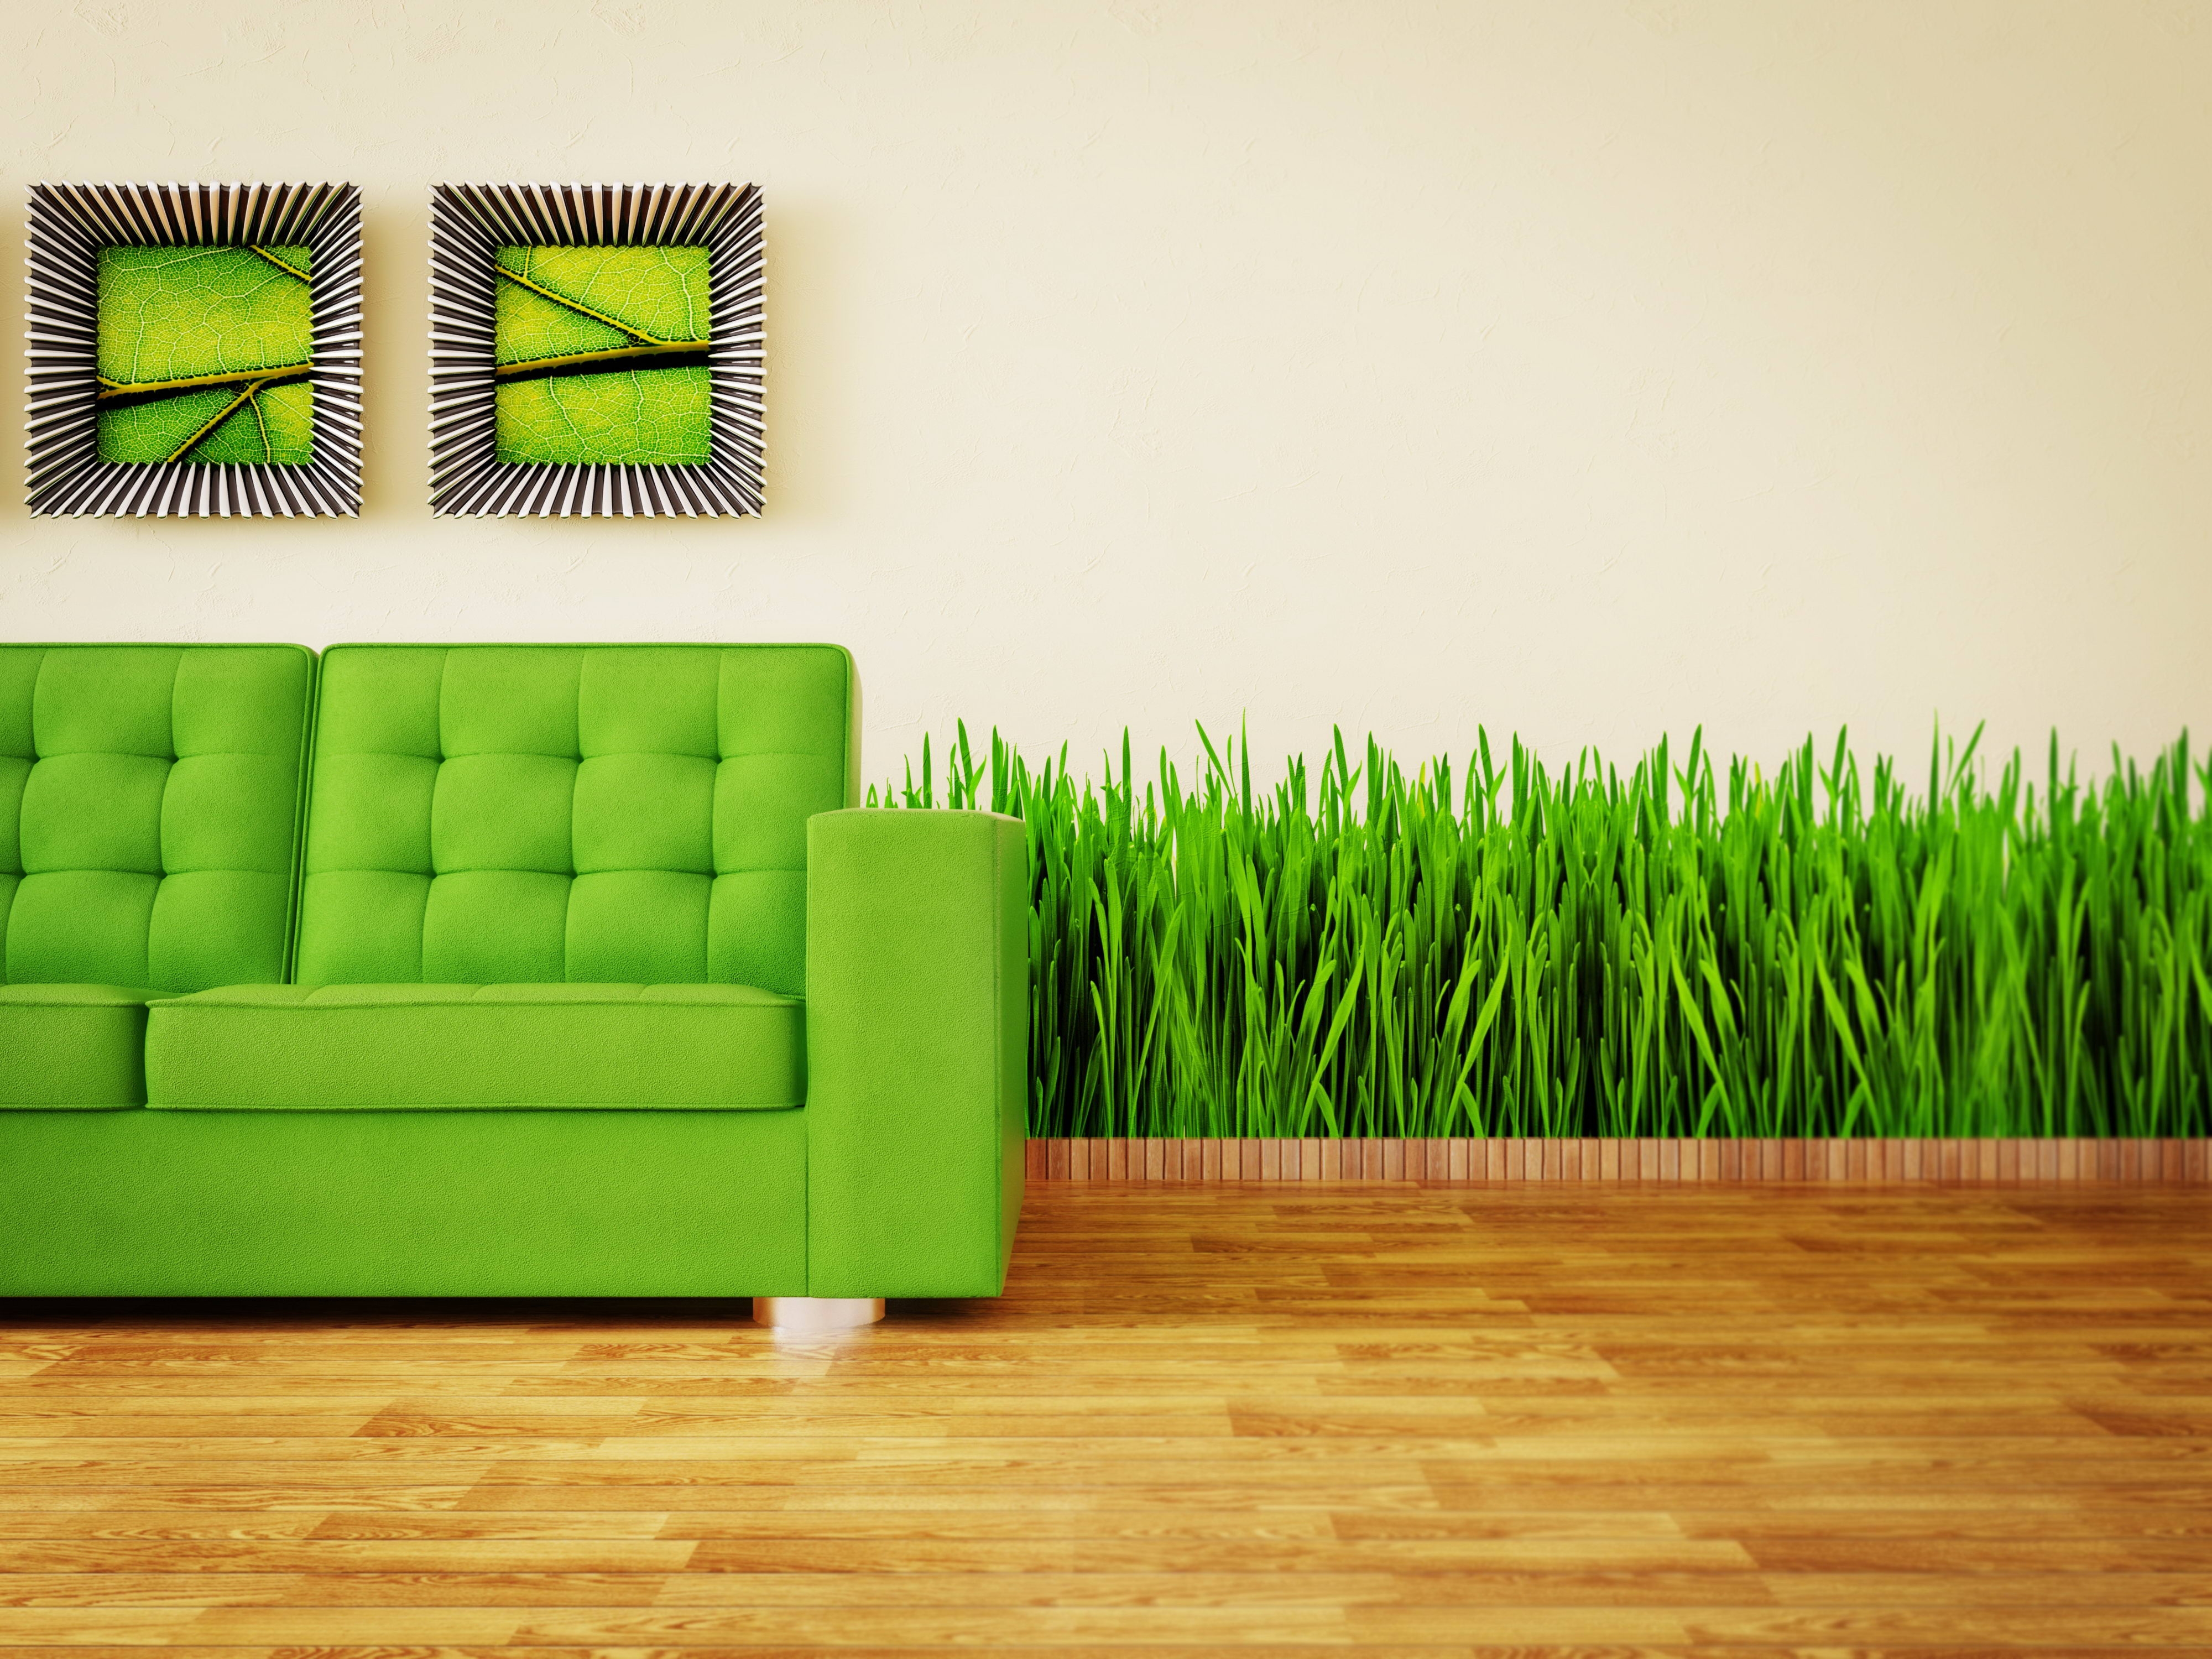 android interior, grass, paintings, miscellanea, miscellaneous, greens, sofa